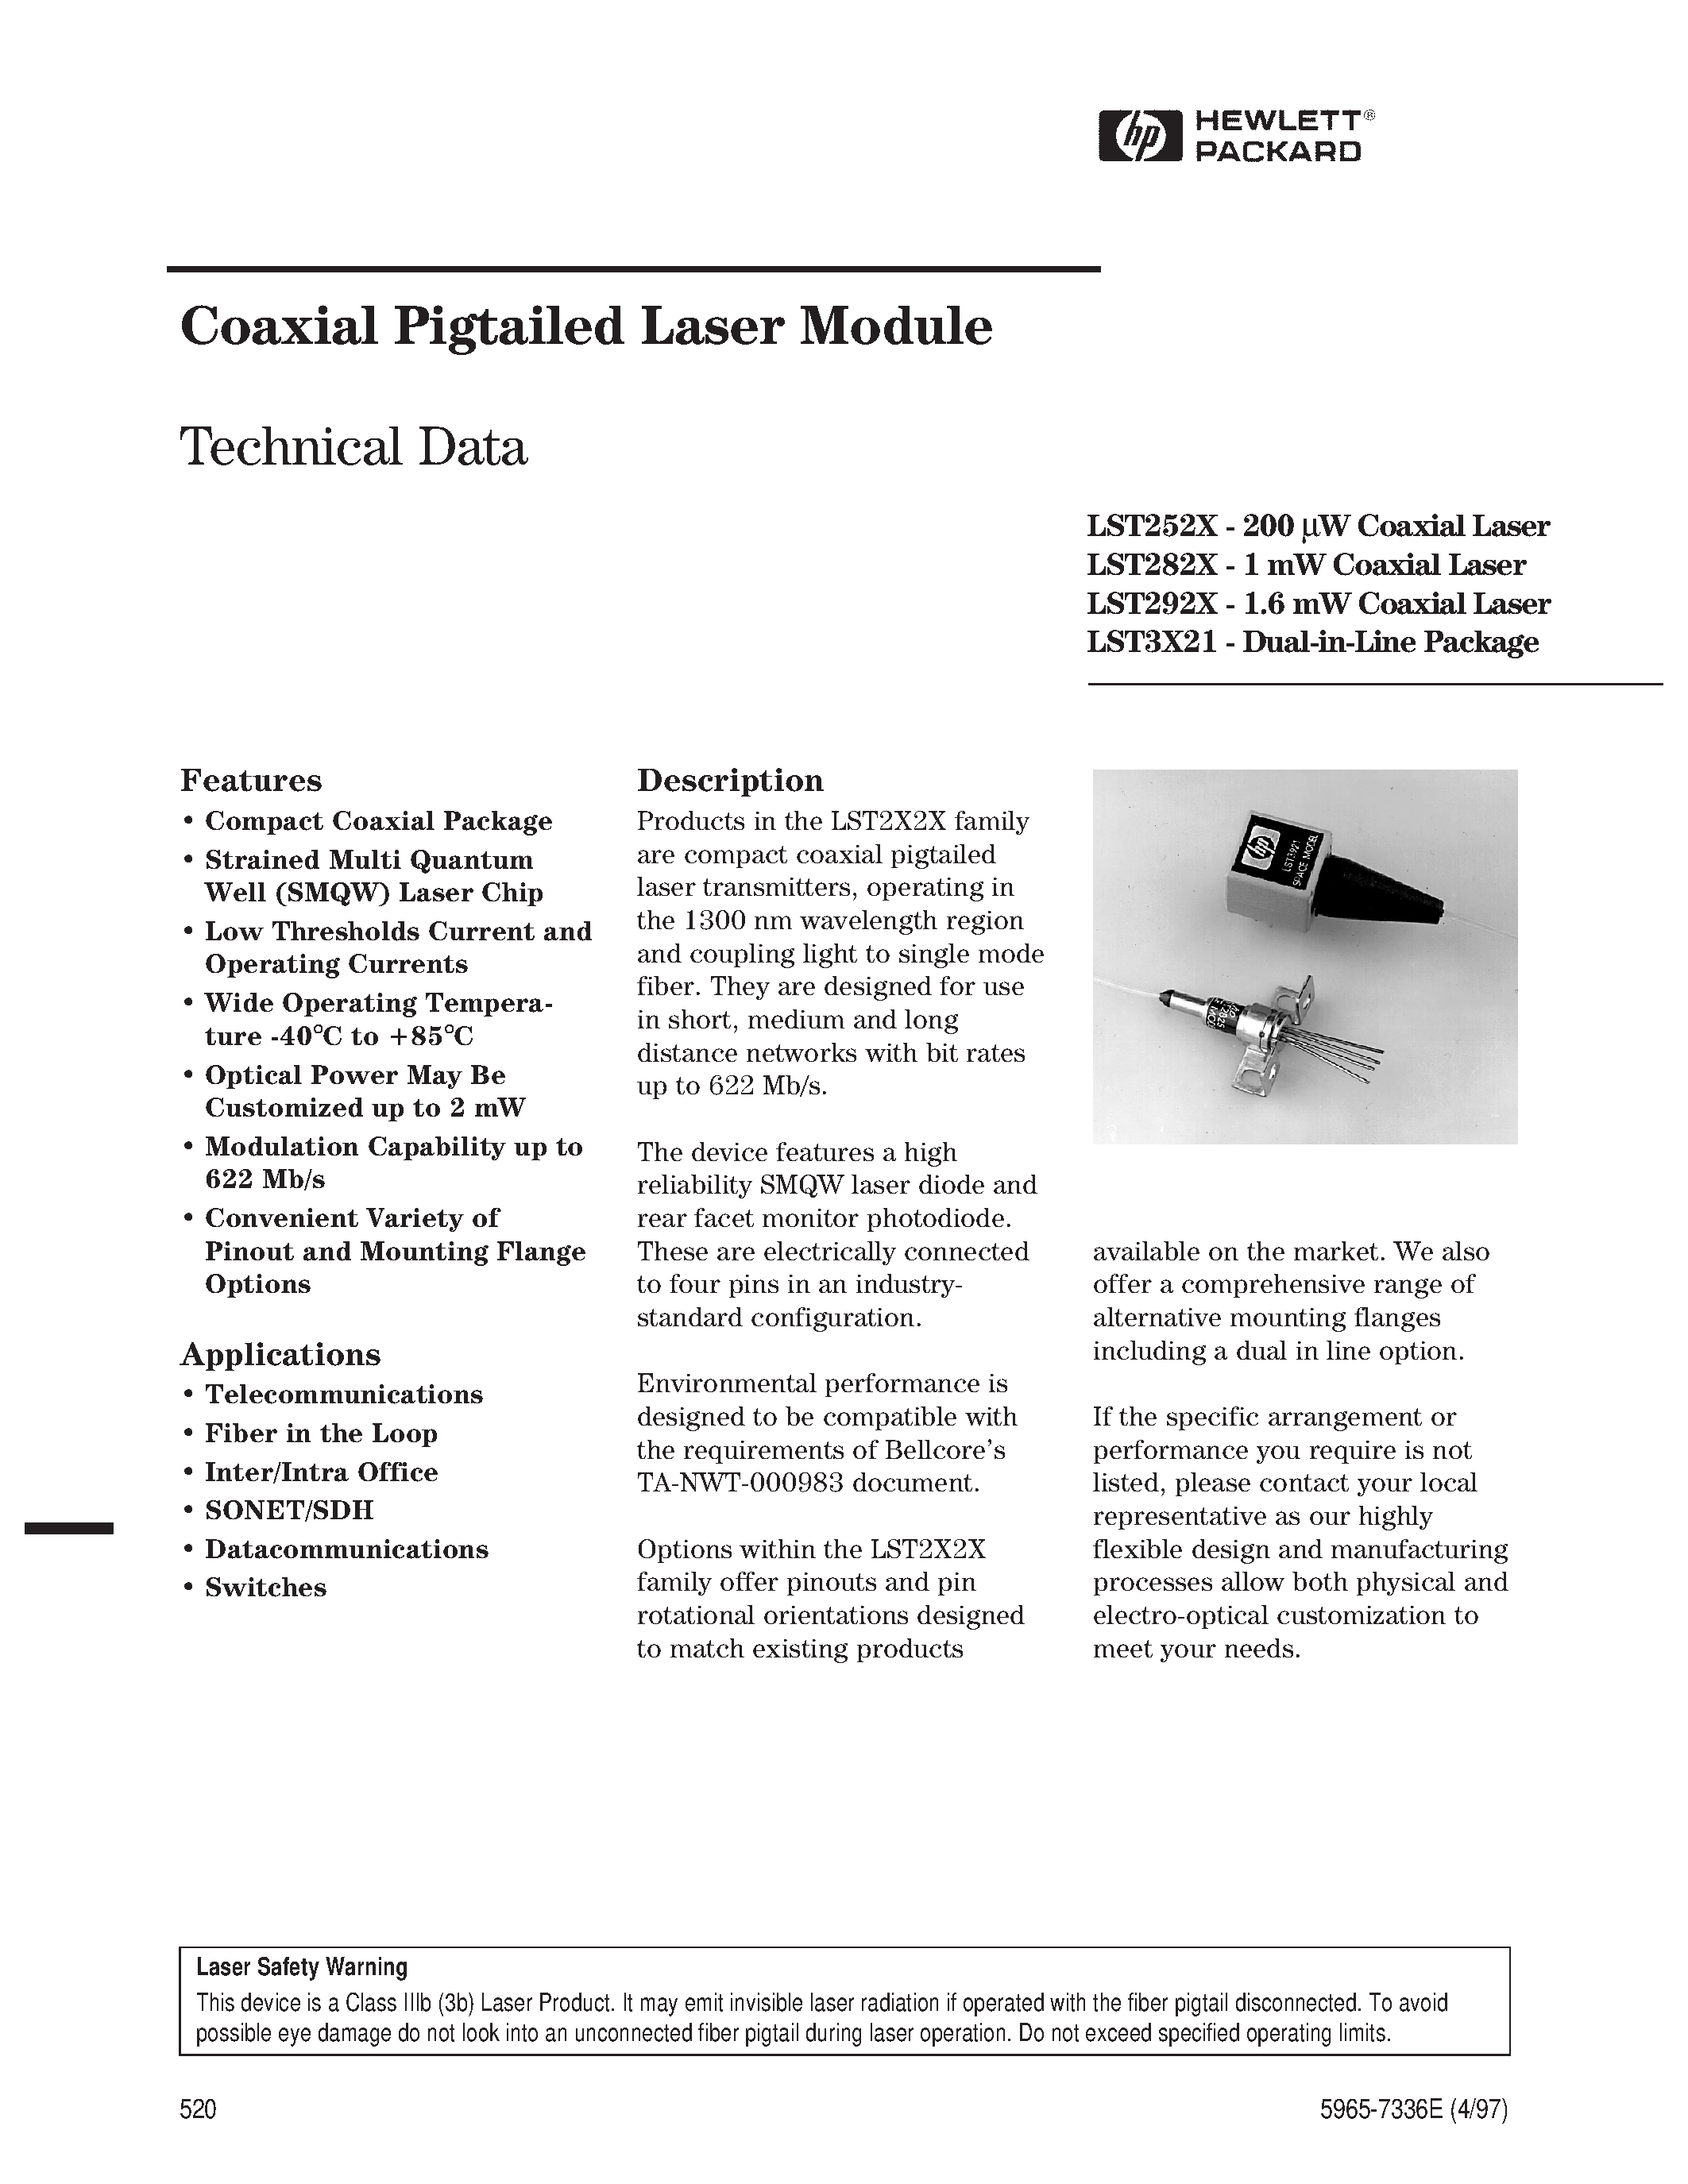 Datasheet LST2925-S4-T-ST - Coaxial Pigtailed Laser Module page 1